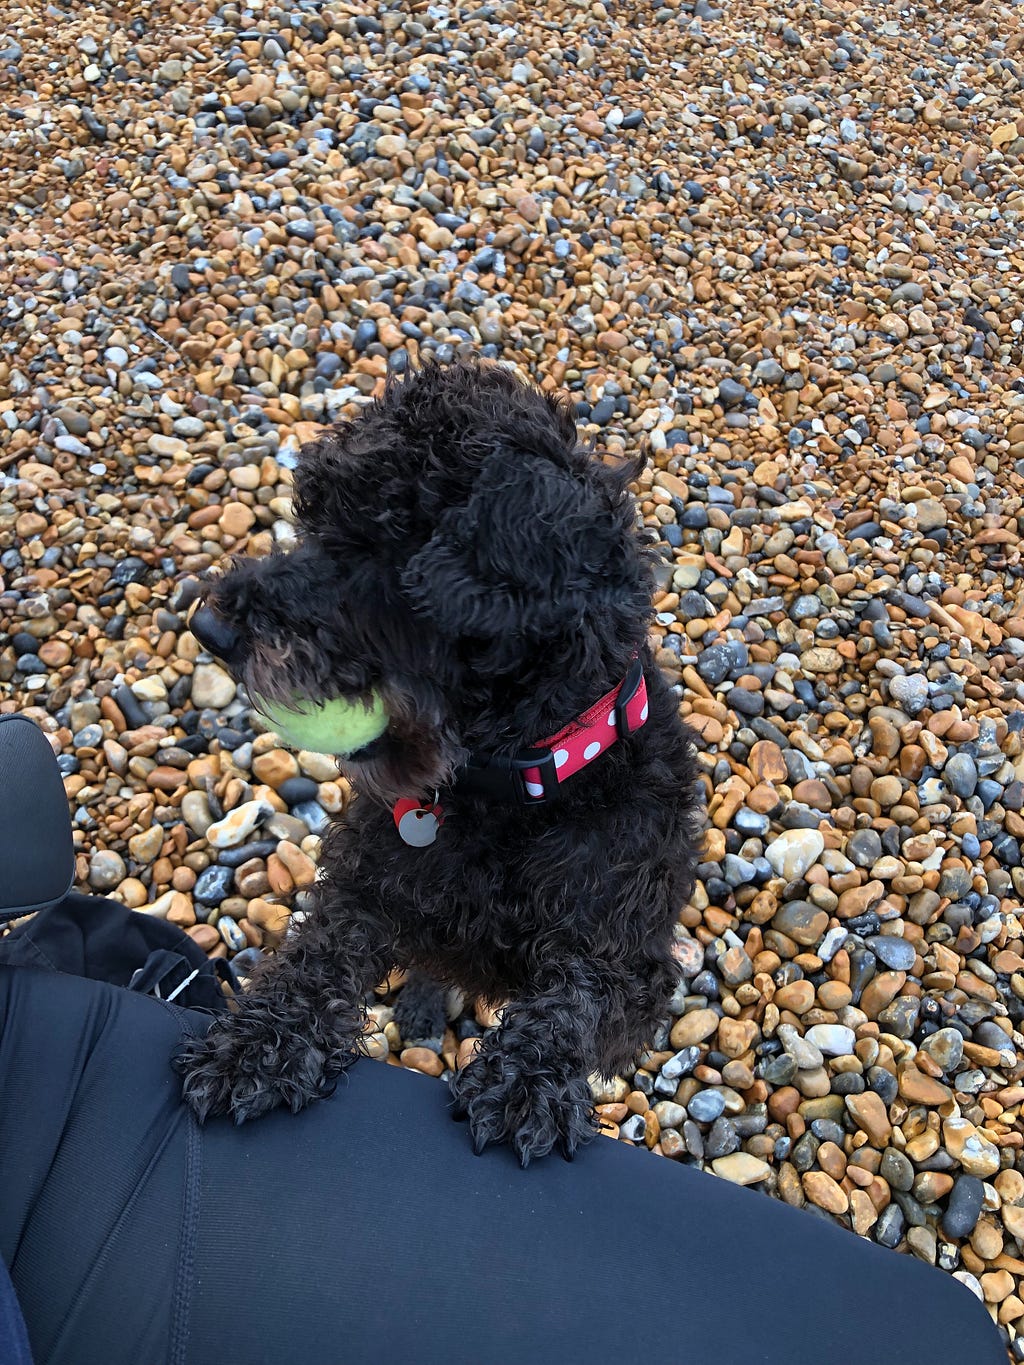 small black dog with curly hair holds a green tennis ball in its mouth on a pebble beach and has its front feet up on a human leg